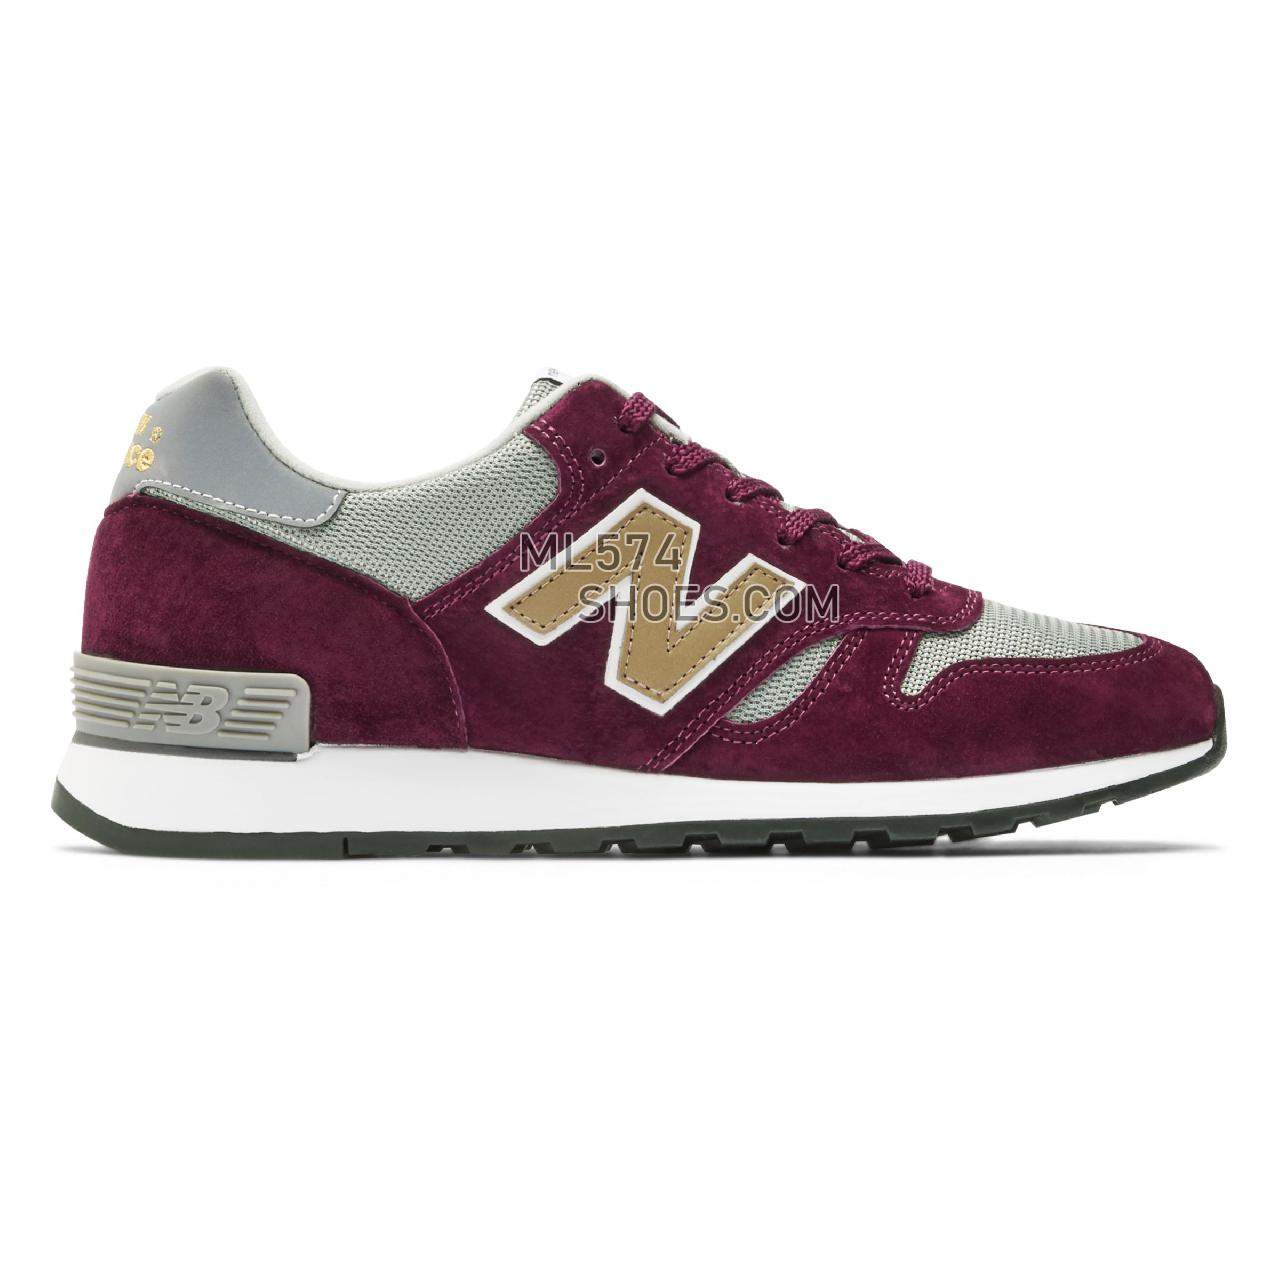 New Balance MADE in UK 670 - Men's Made in USA And UK Sneakers - Burgundy with Grey and Gold - M670BGW